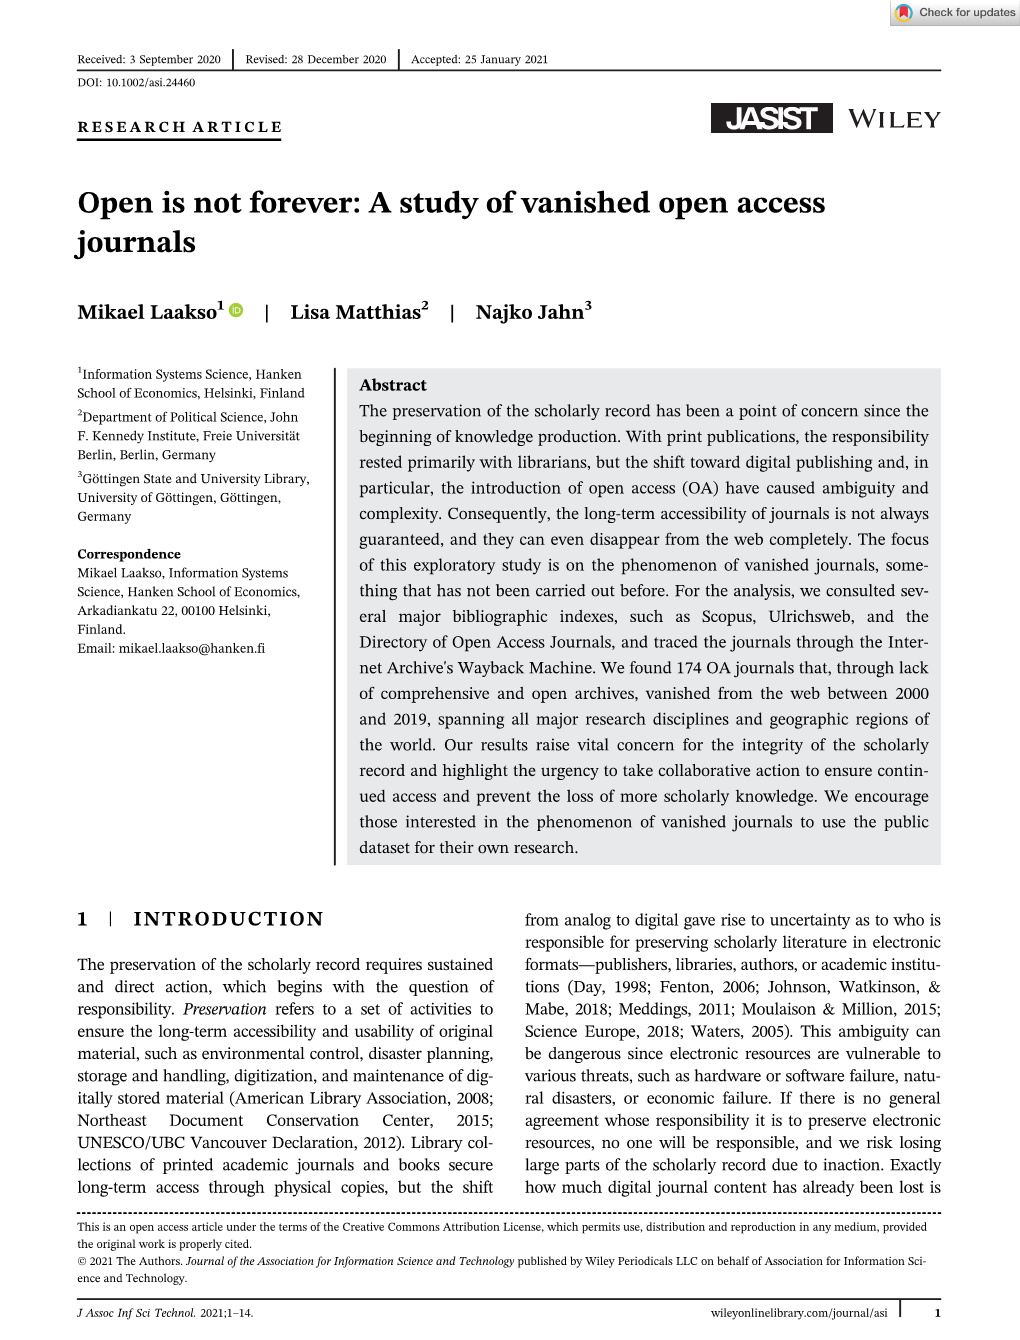 Open Is Not Forever: a Study of Vanished Open Access Journals